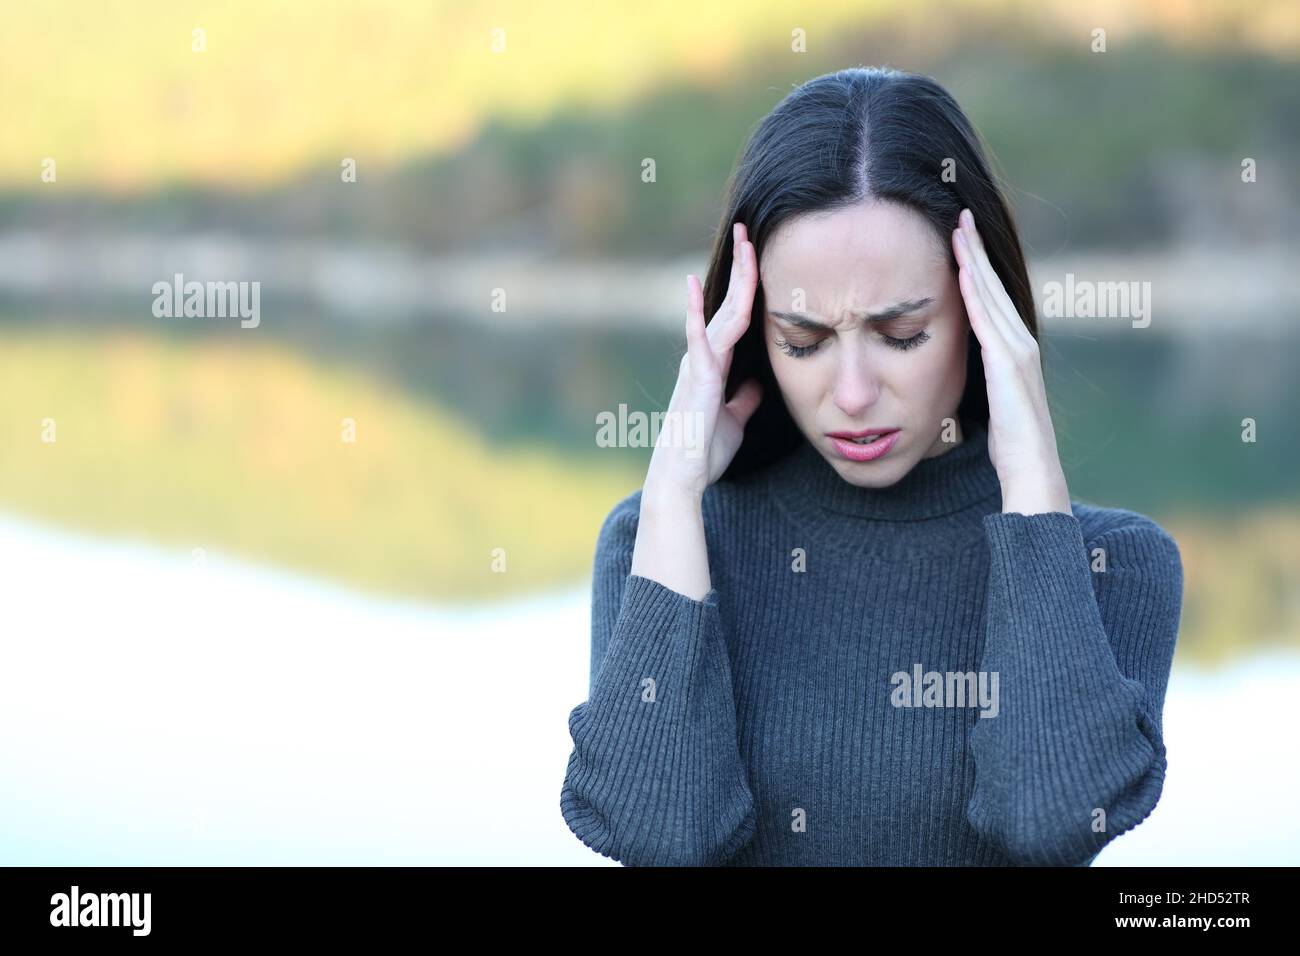 Front view portrait of a woman suffering migraine in a lake Stock Photo